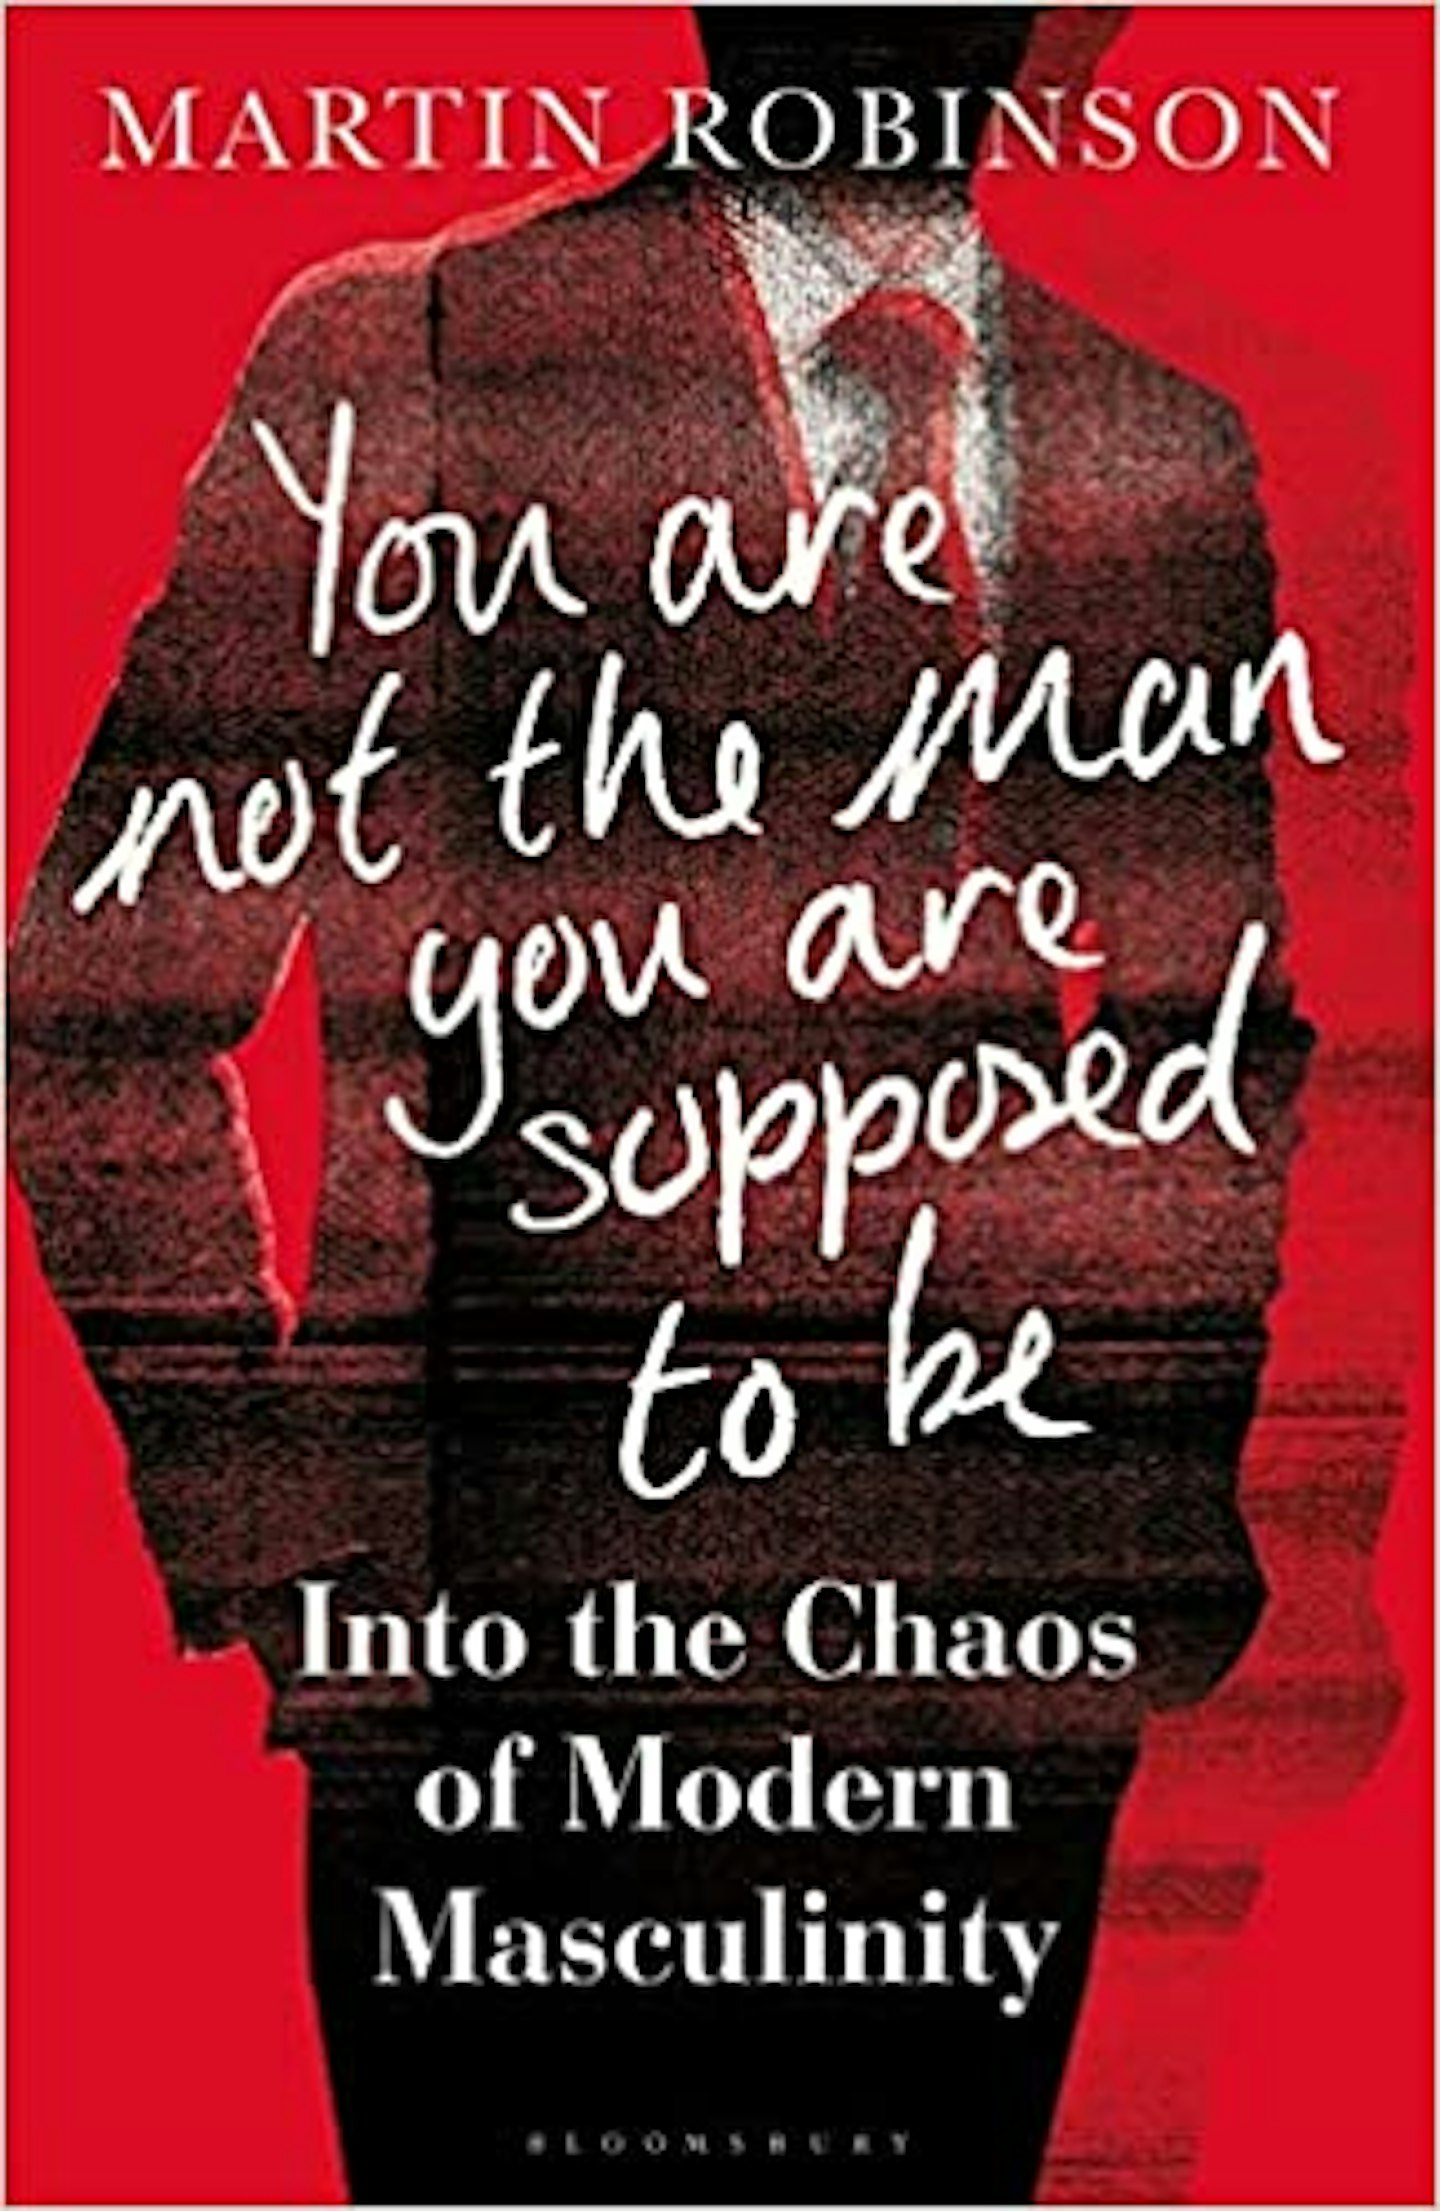 You Are Not the Man You Are Supposed to Be: Into the Chaos of Modern Masculinity, Martin Robinson